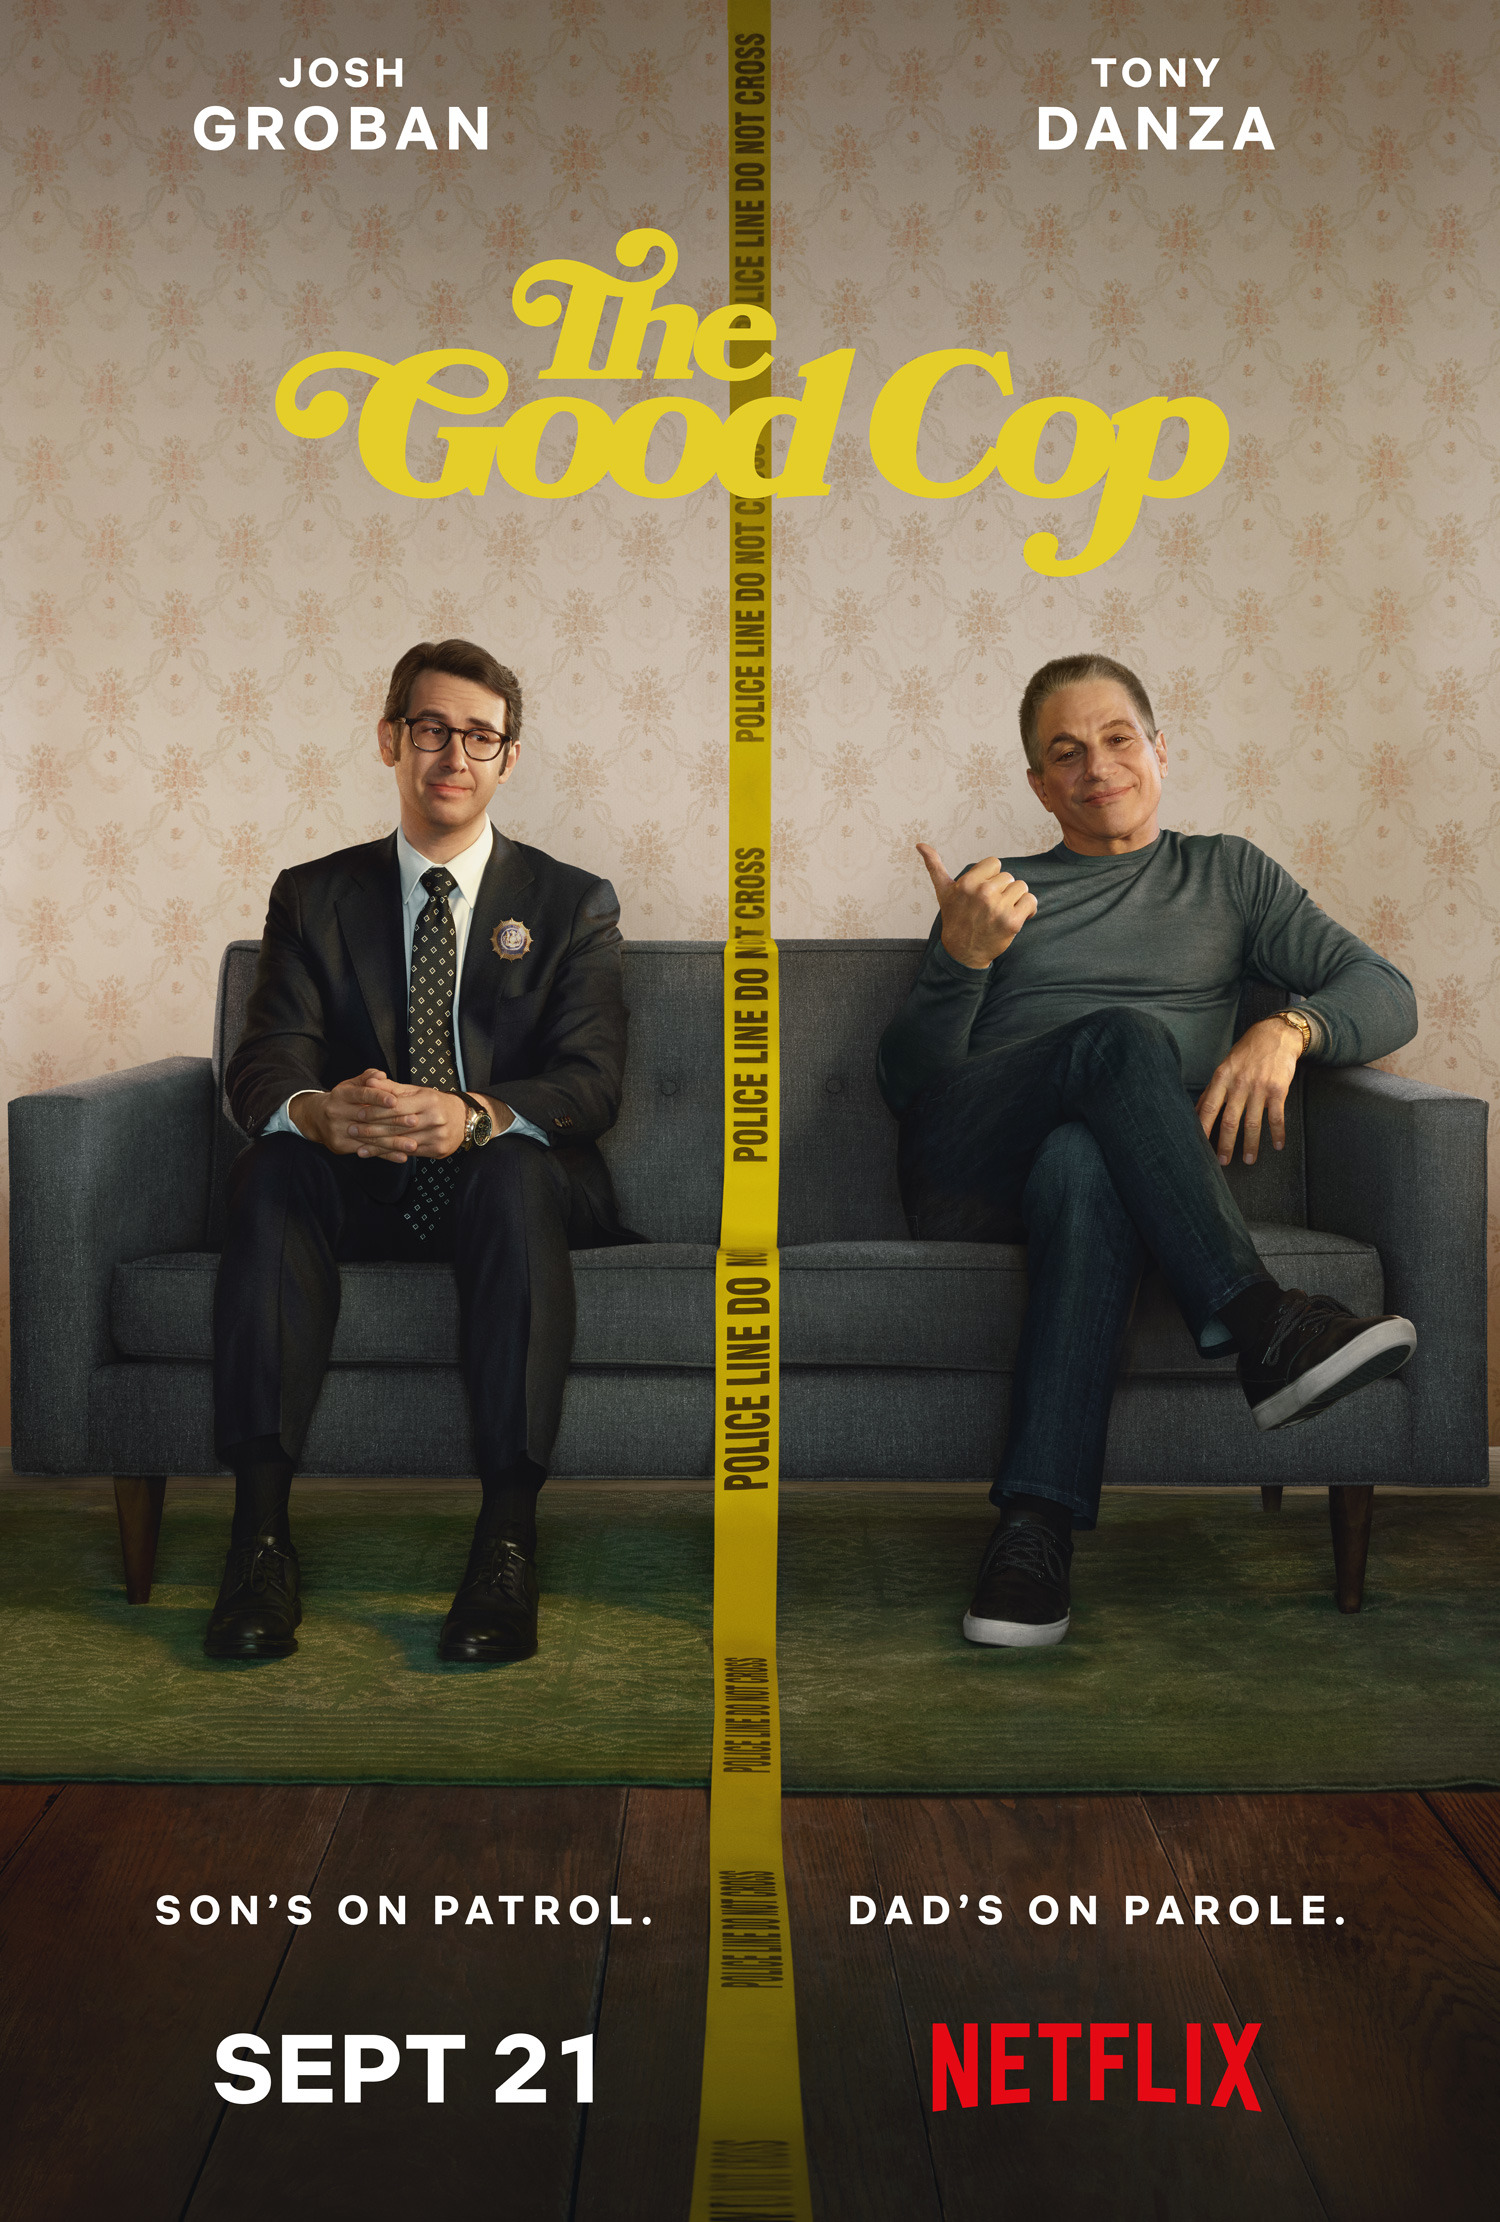 Mega Sized TV Poster Image for The Good Cop 